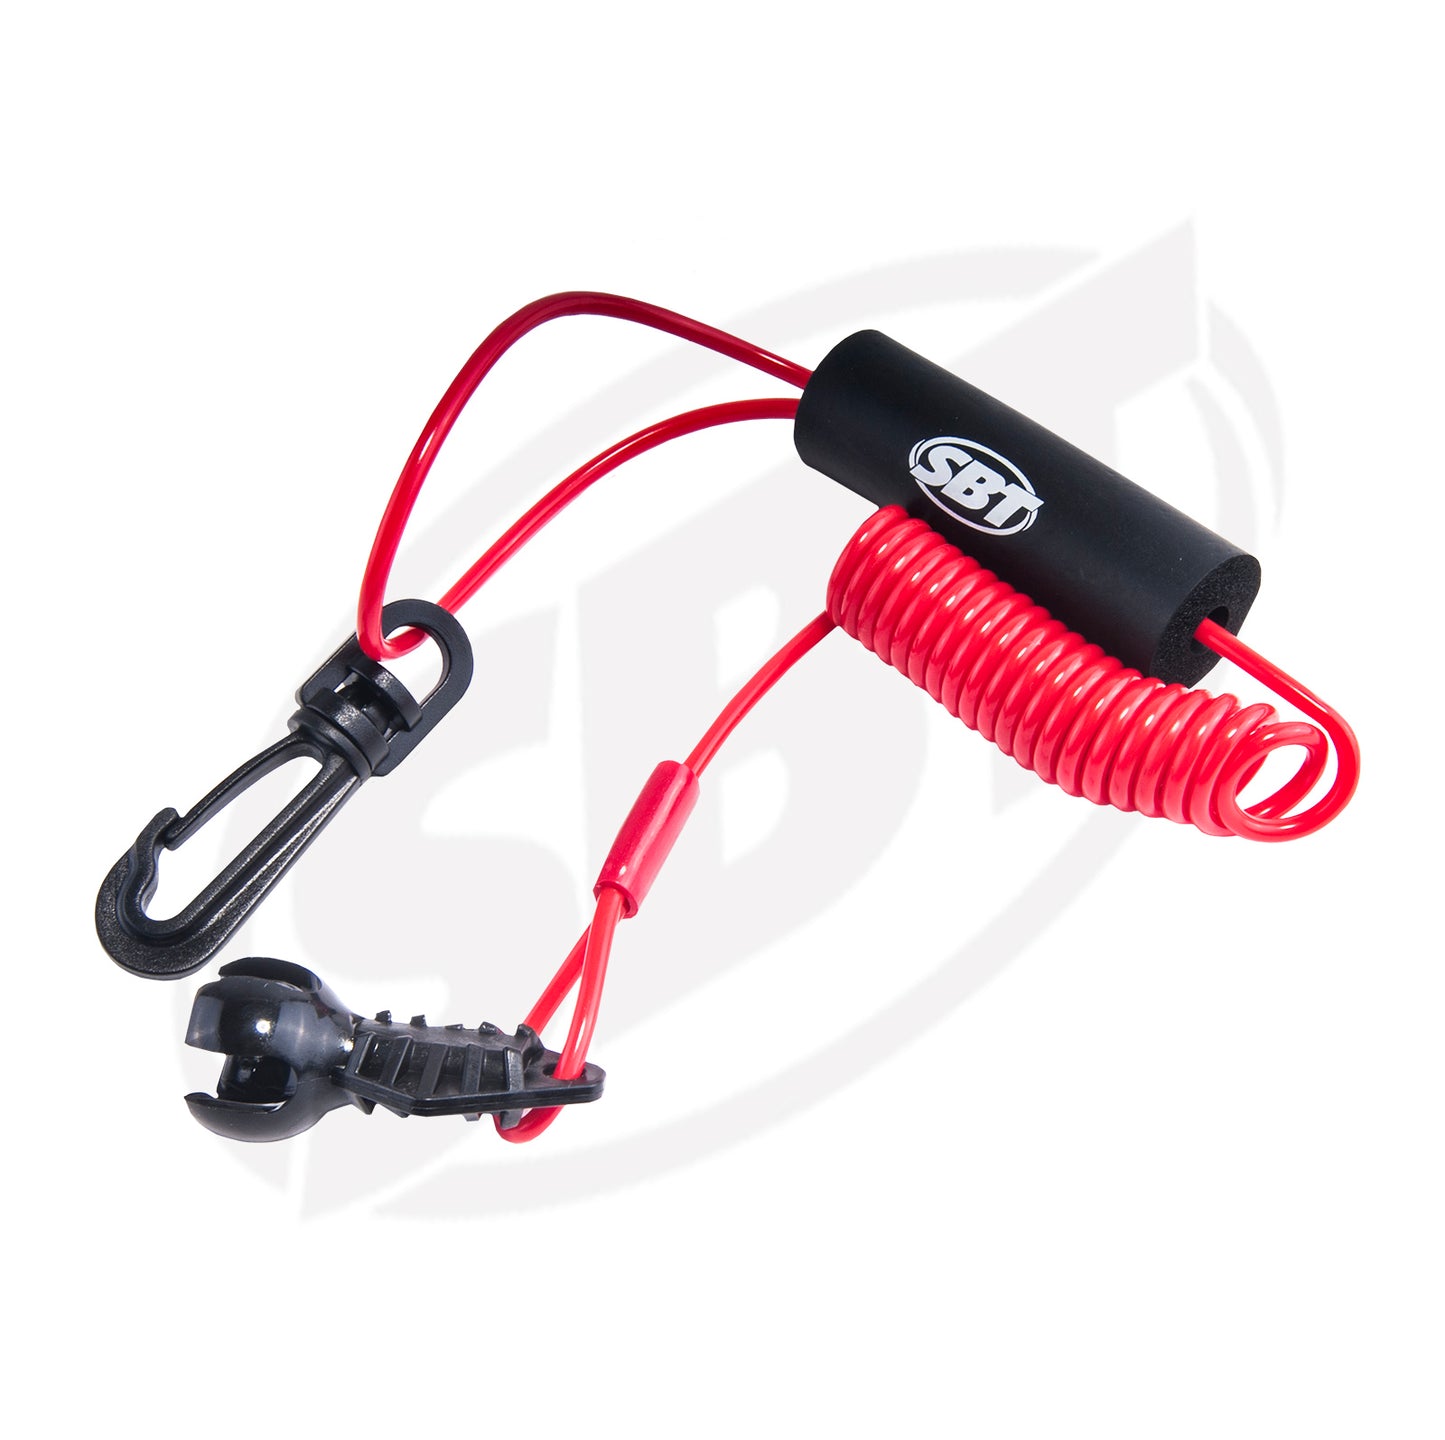 SBT Sea-Doo Spark Safety Lanyard - Non Programmable 2014/15  Only